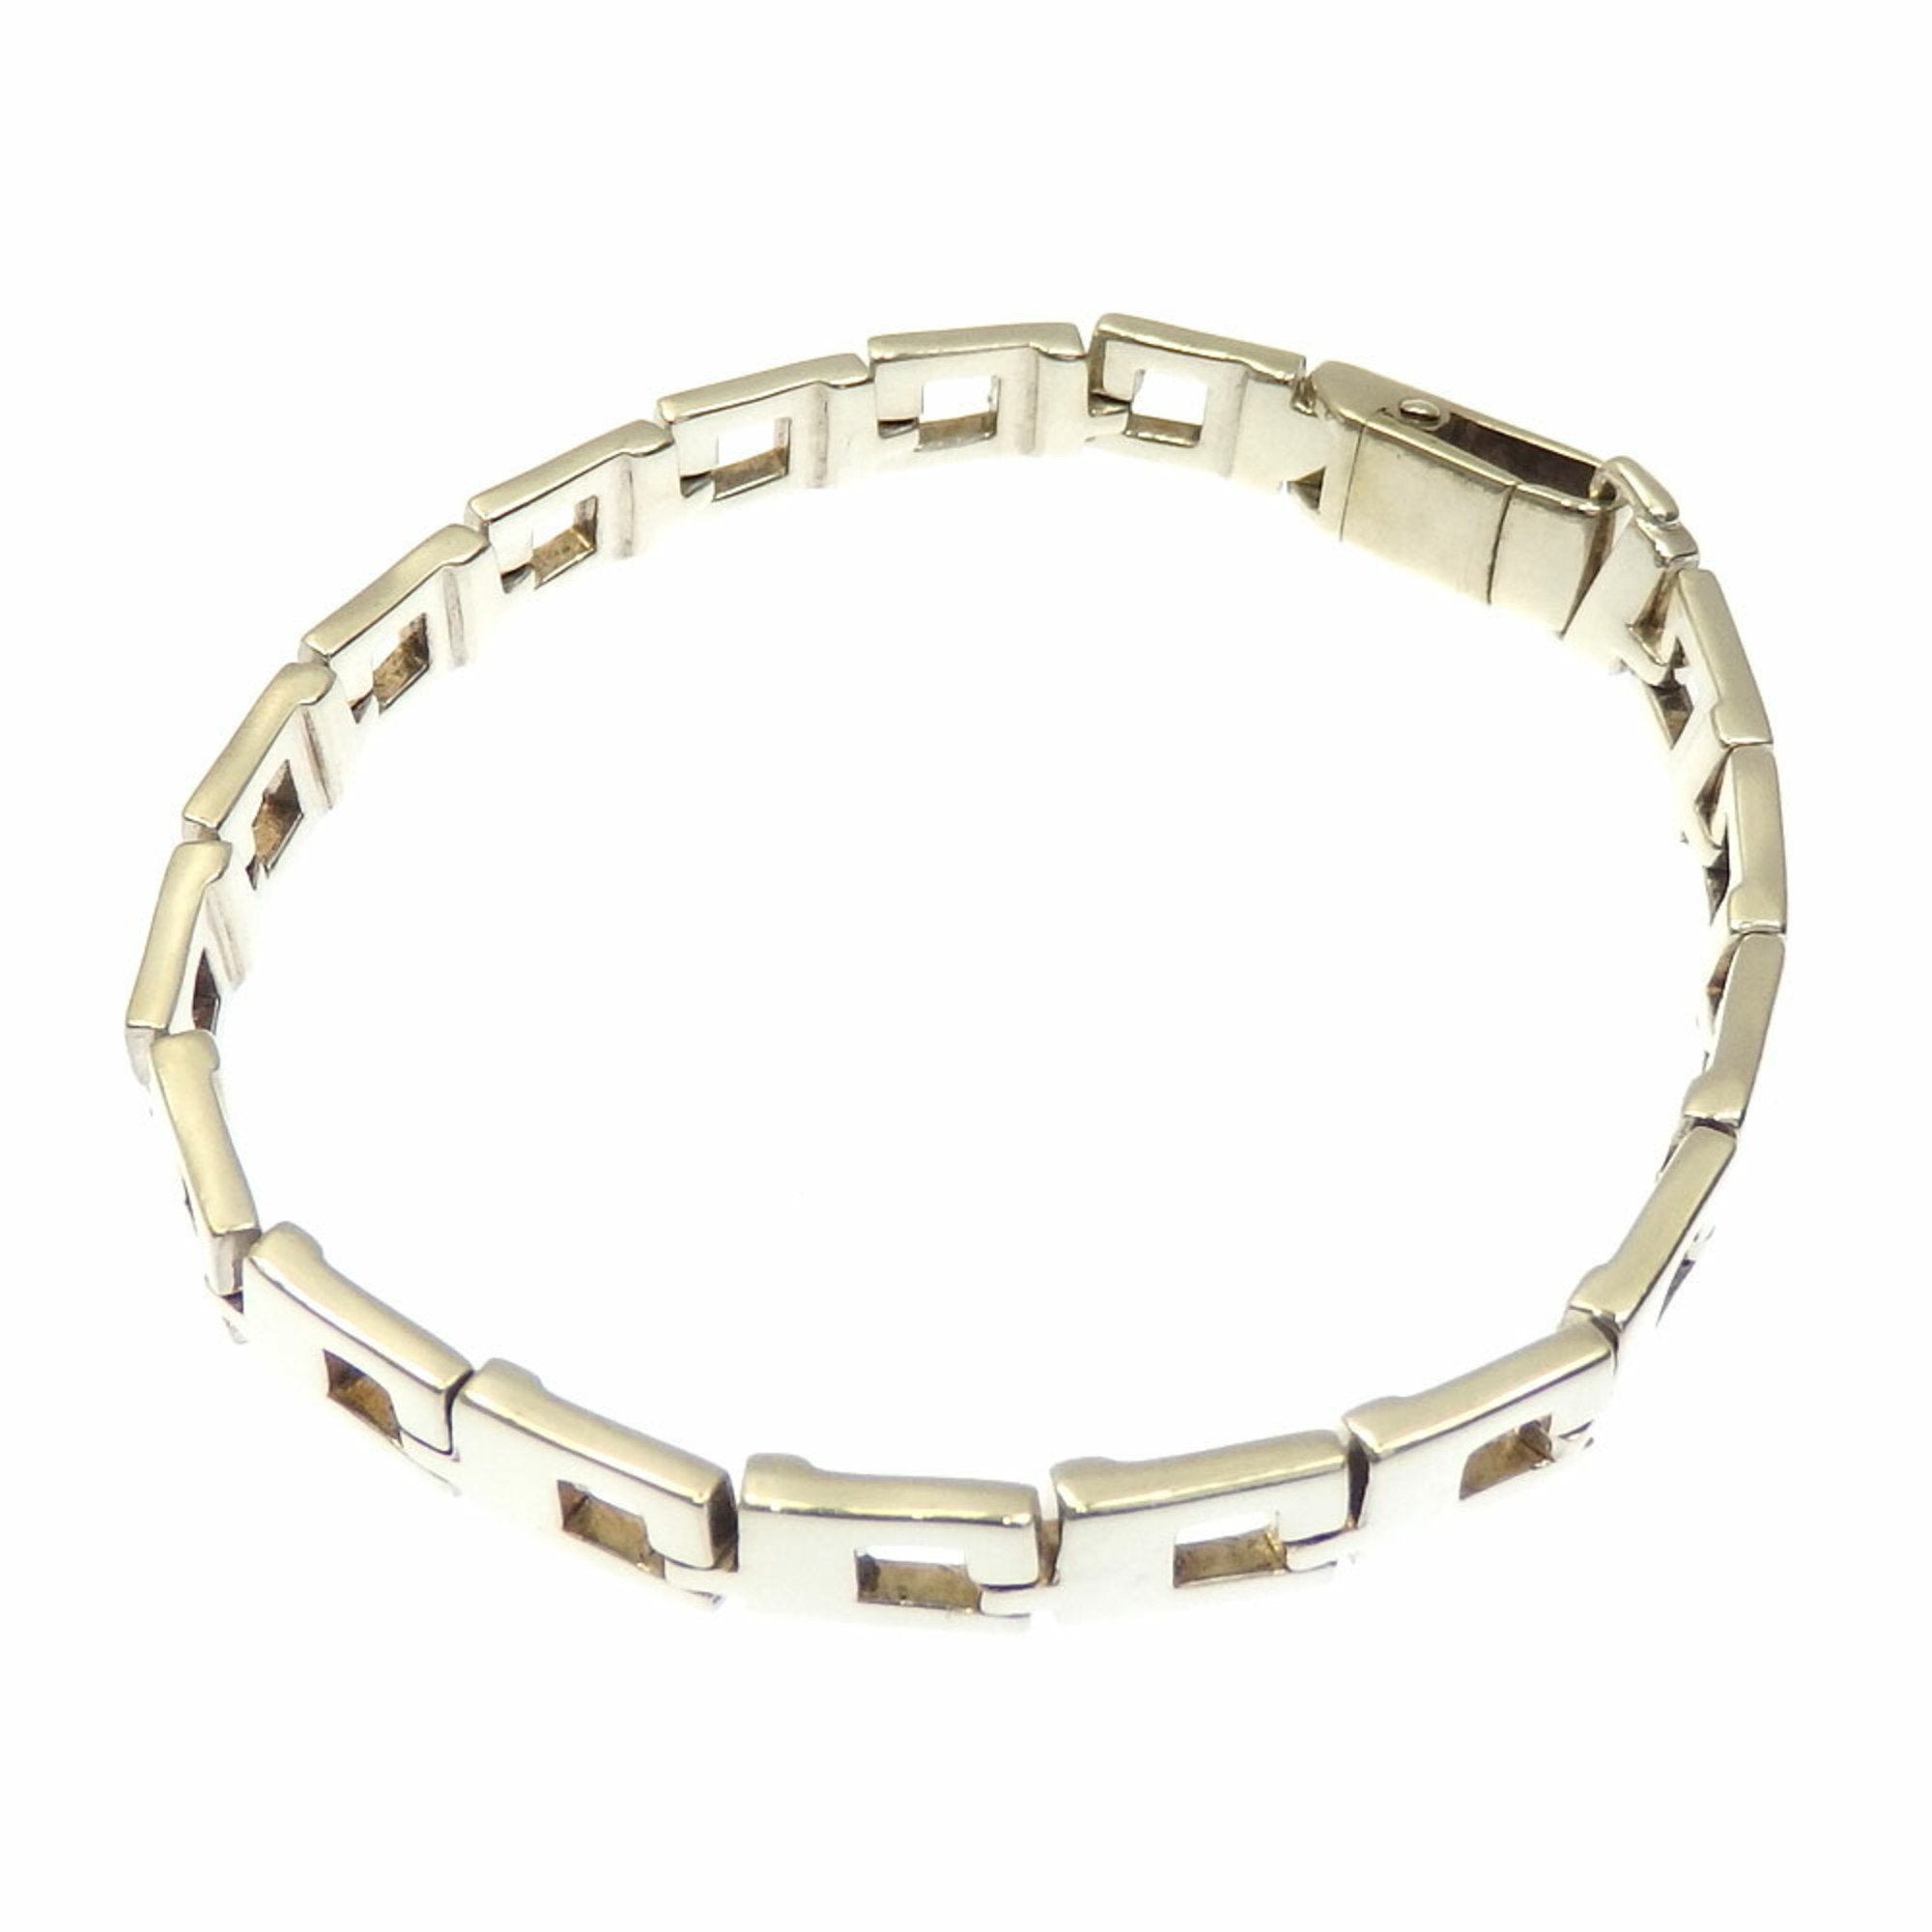 Gucci G-Timeless White MOP Feline Two-Tone Bracelet Women's... for C$1,153  for sale from a Seller on Chrono24